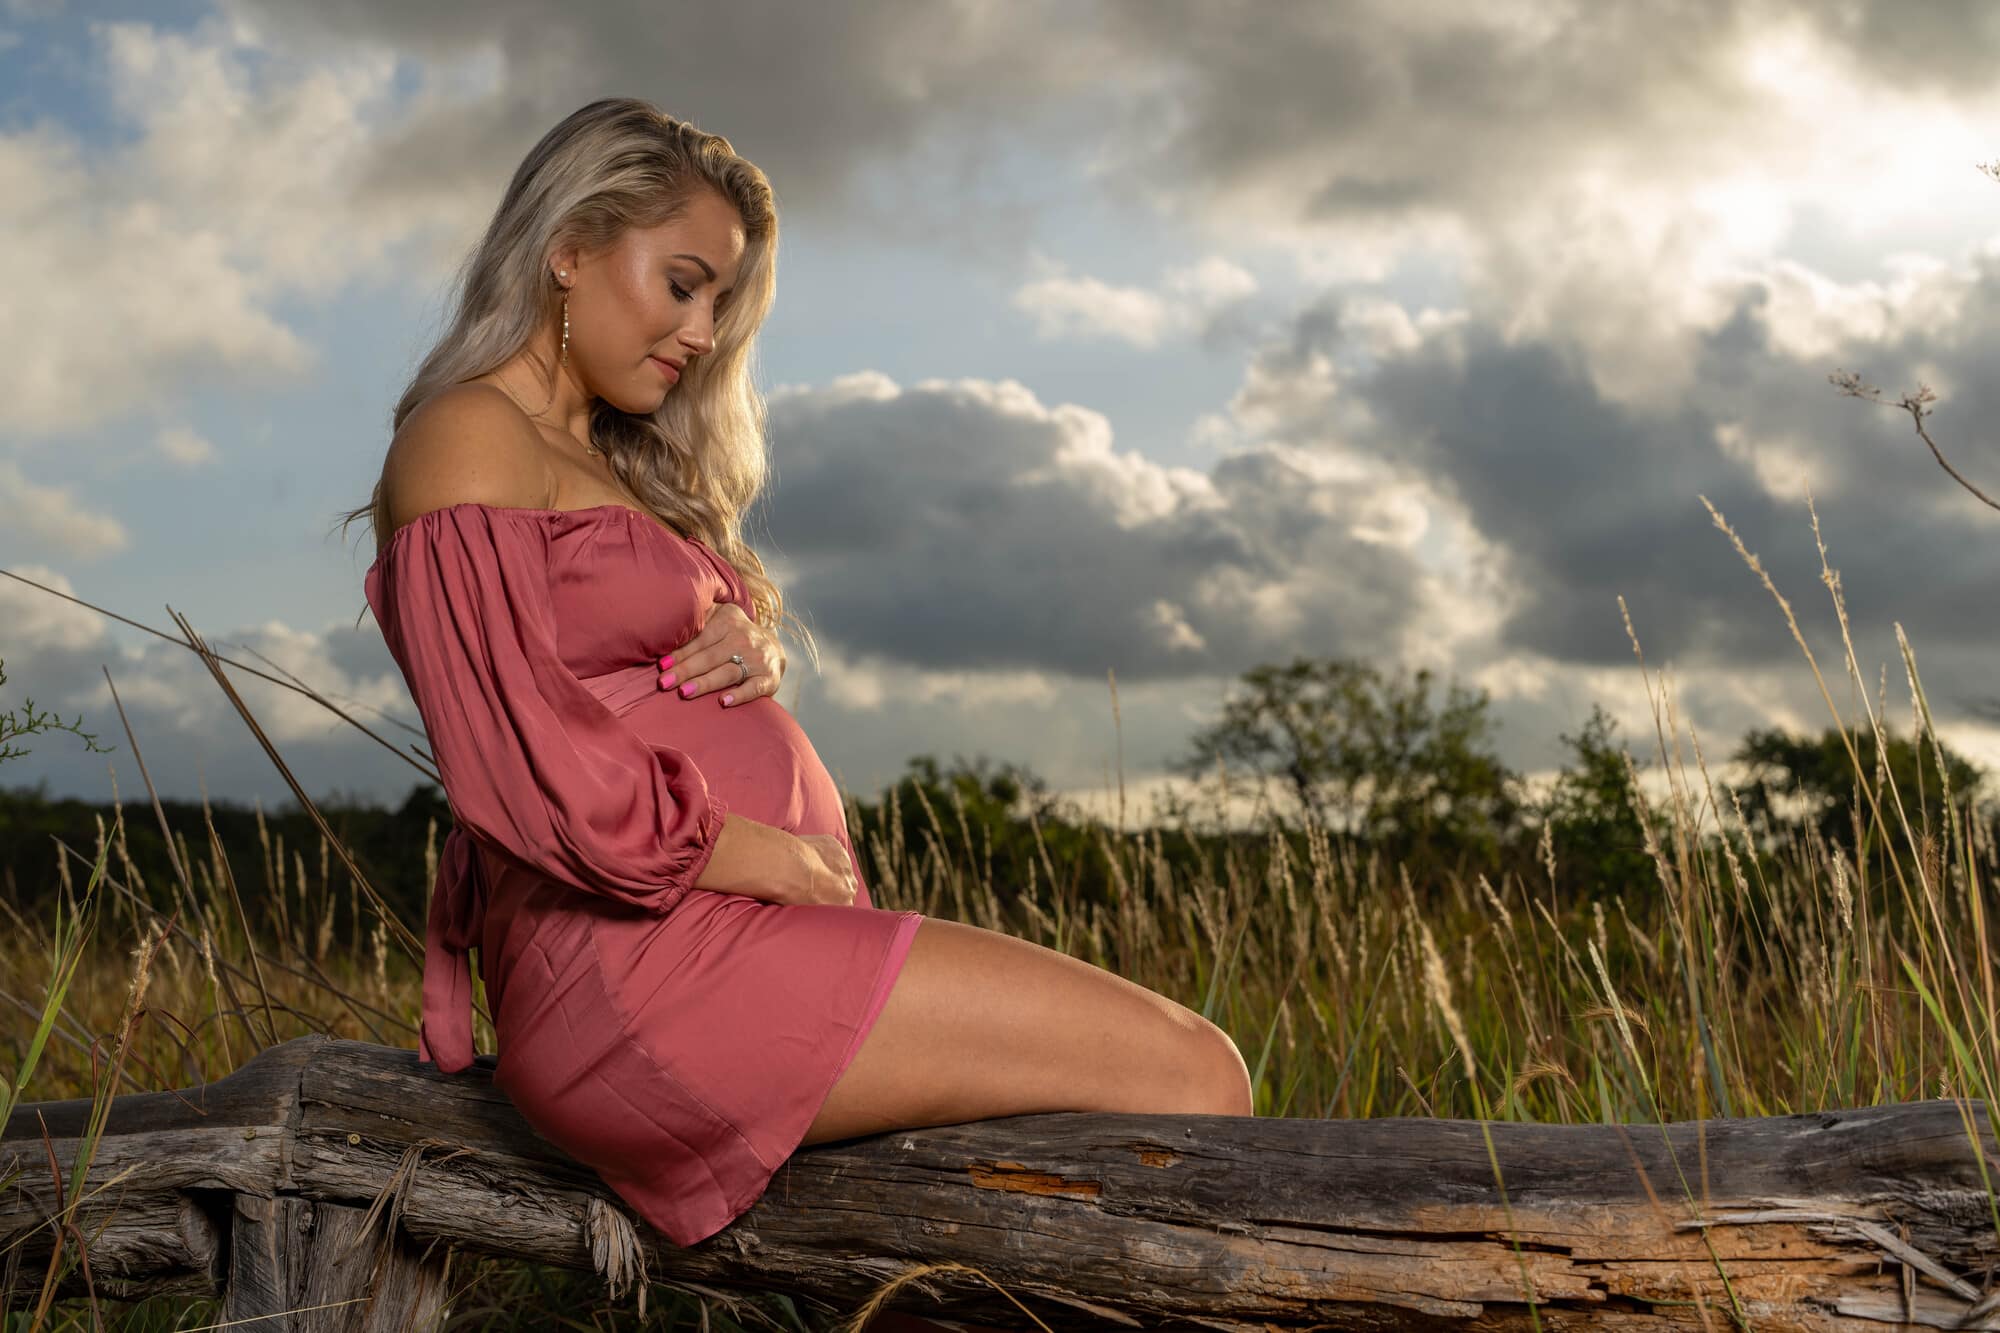 Pregnant woman sitting on a log in a field.